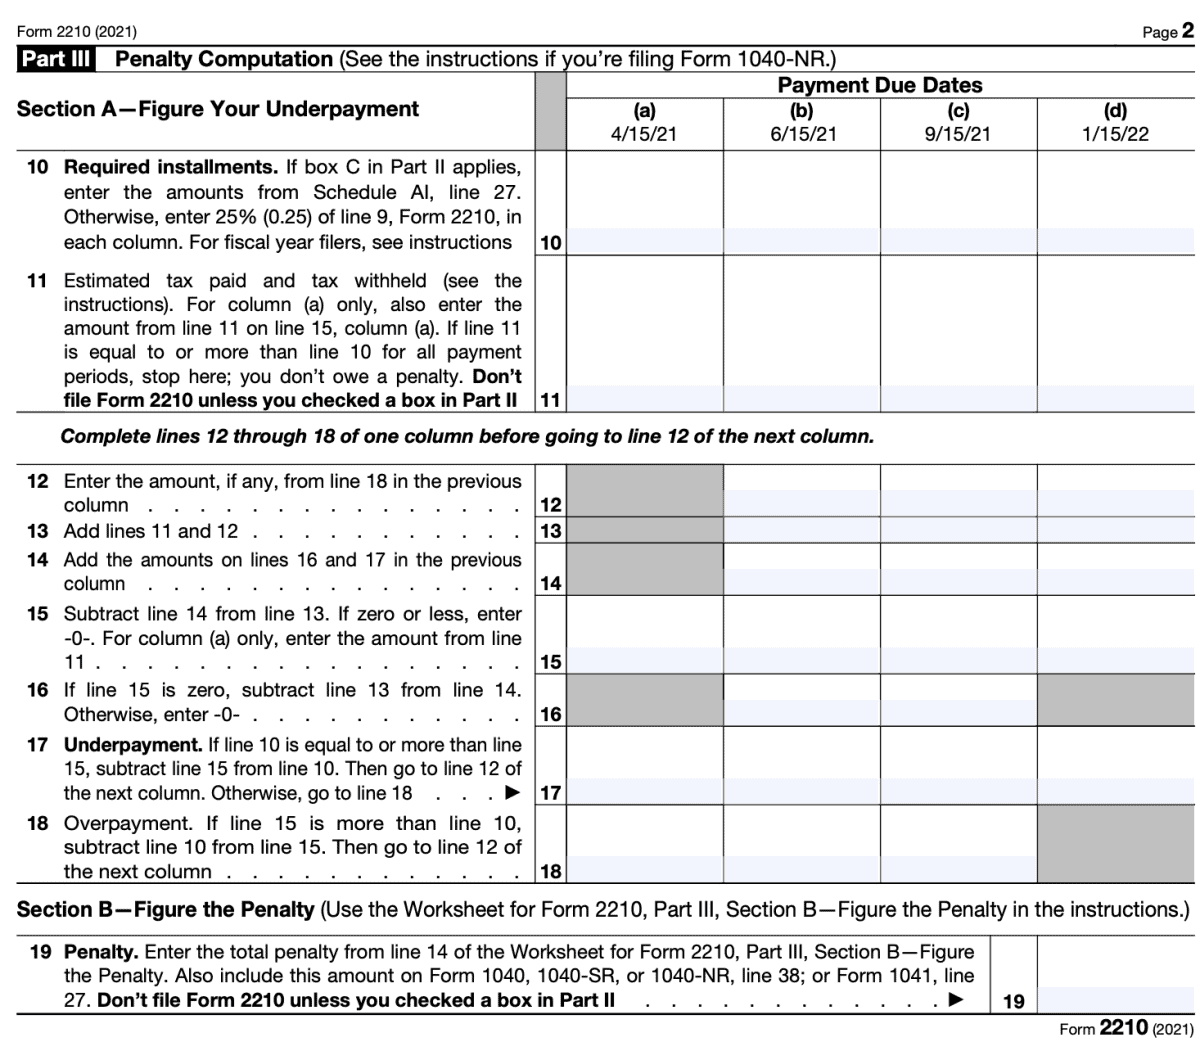 IRS Form 2210 Instructions Underpayment of Estimated Tax